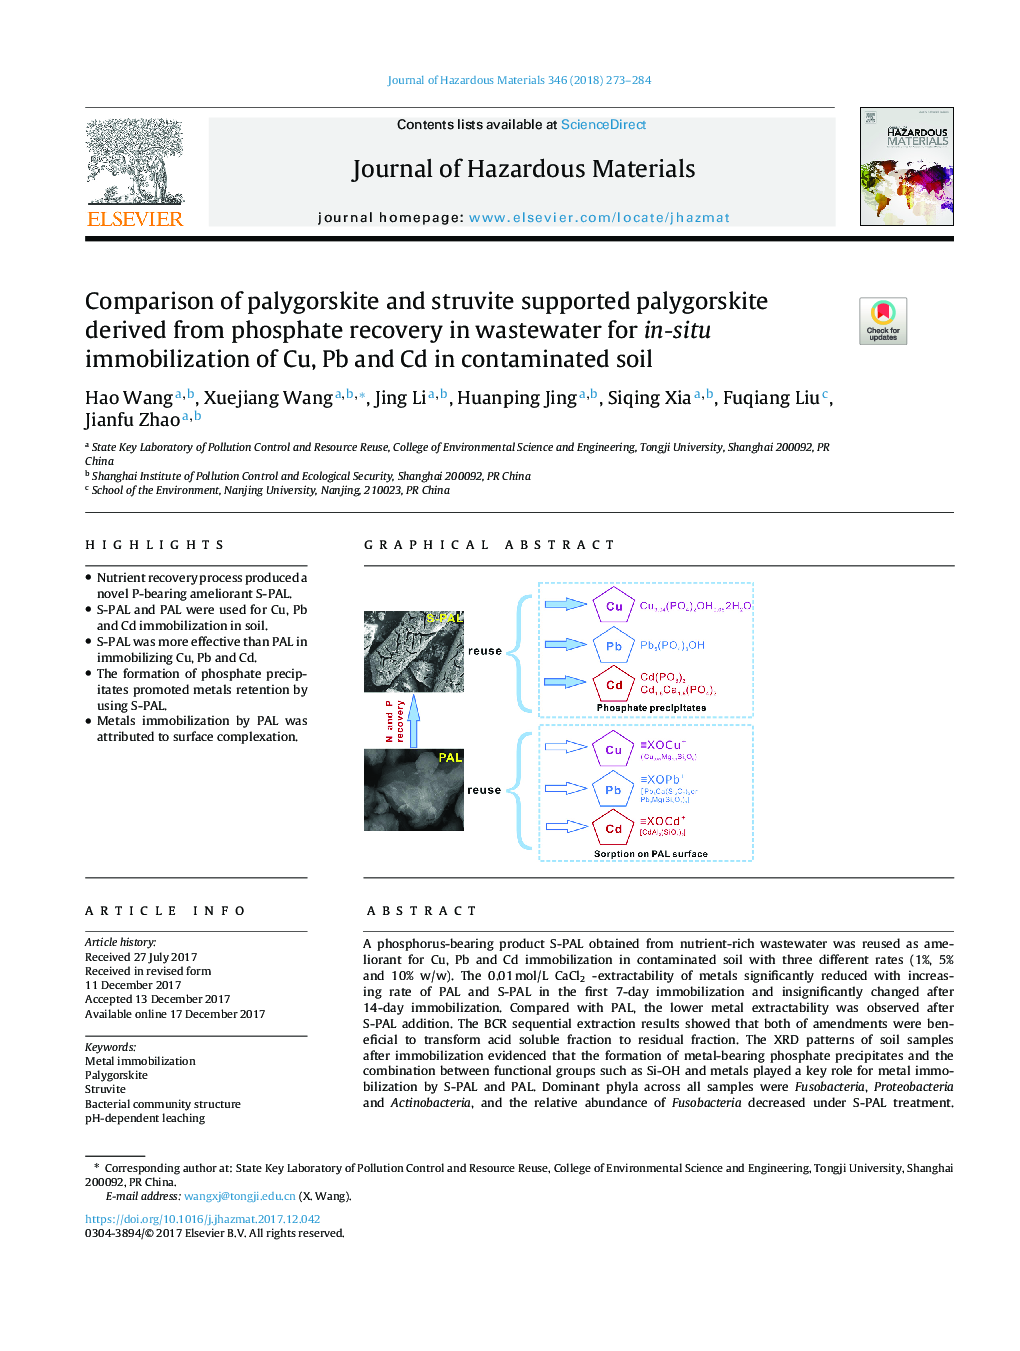 Comparison of palygorskite and struvite supported palygorskite derived from phosphate recovery in wastewater for in-situ immobilization of Cu, Pb and Cd in contaminated soil